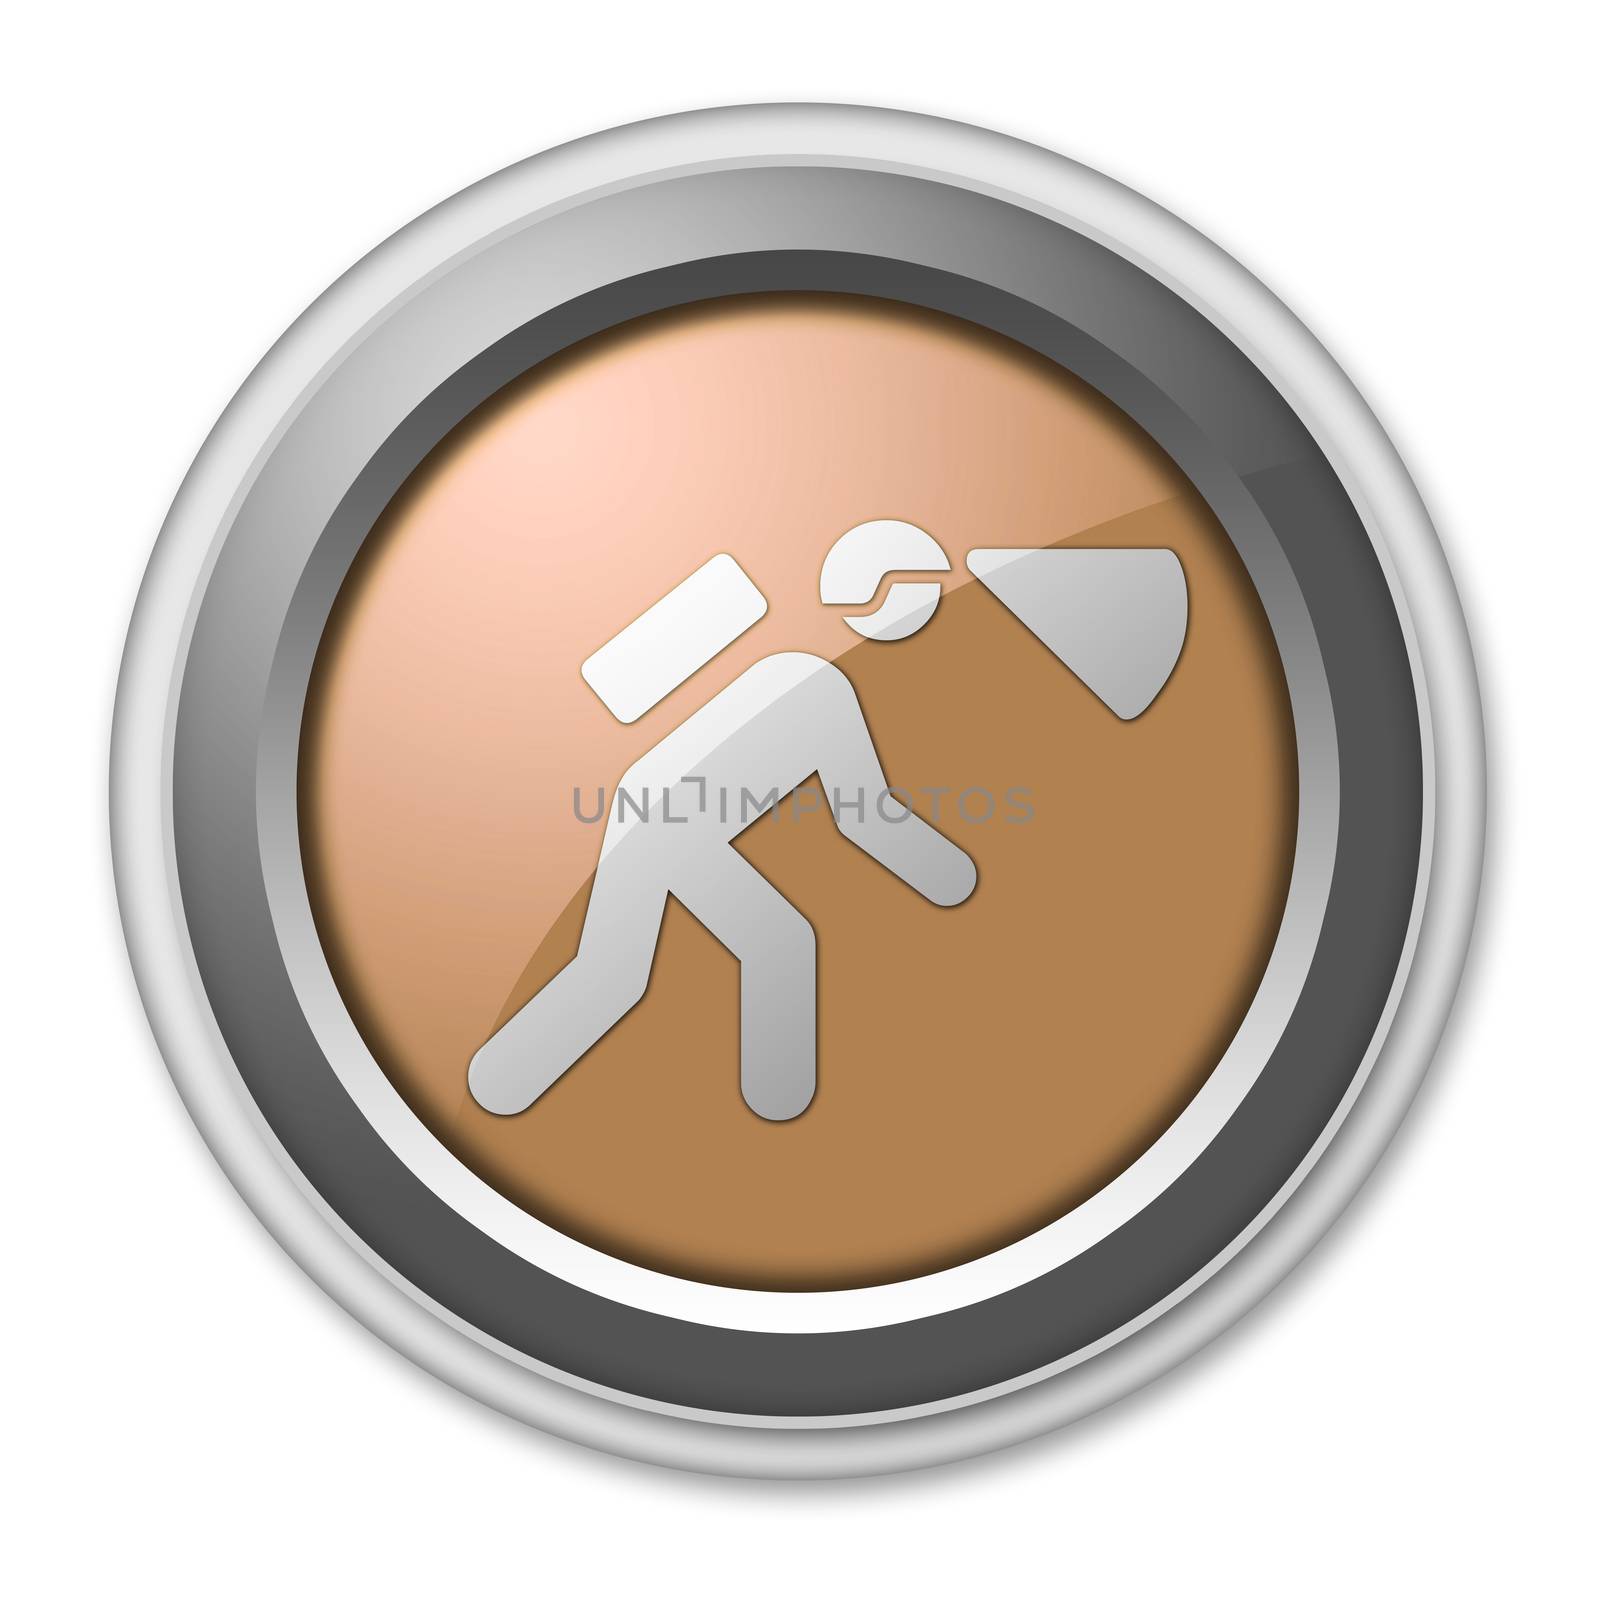 Icon, Button, Pictogram with Spelunking symbol